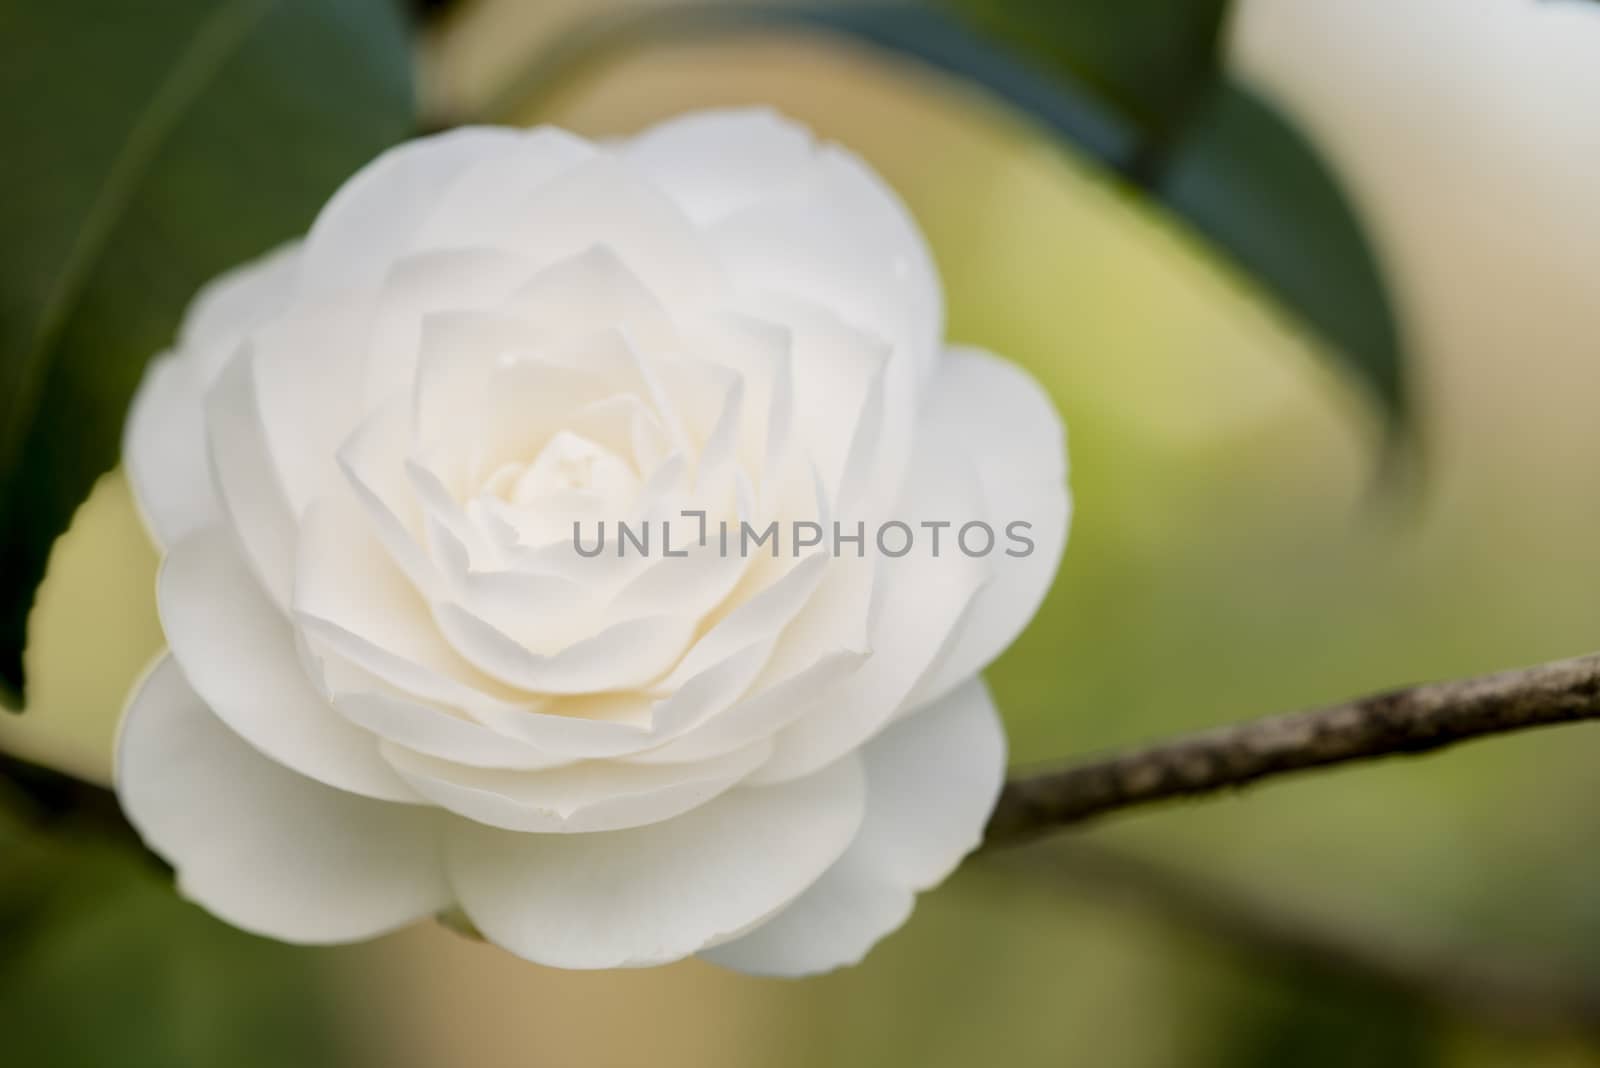 Detail of Camelia flower with white, grey and yellow petals.